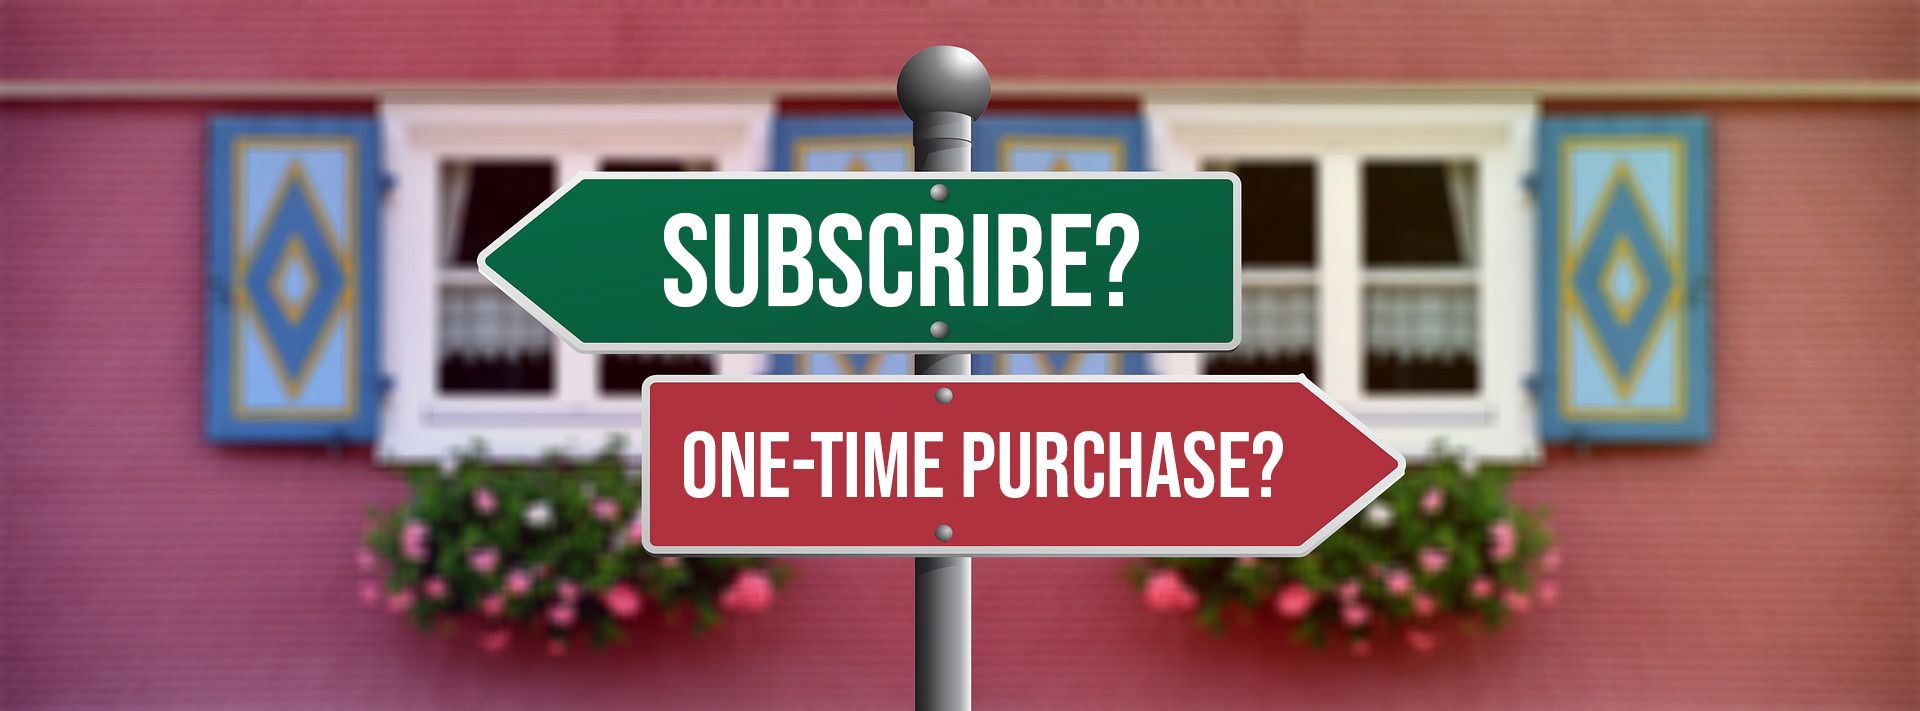 subscribe or one-time purchase arrow sign illustration